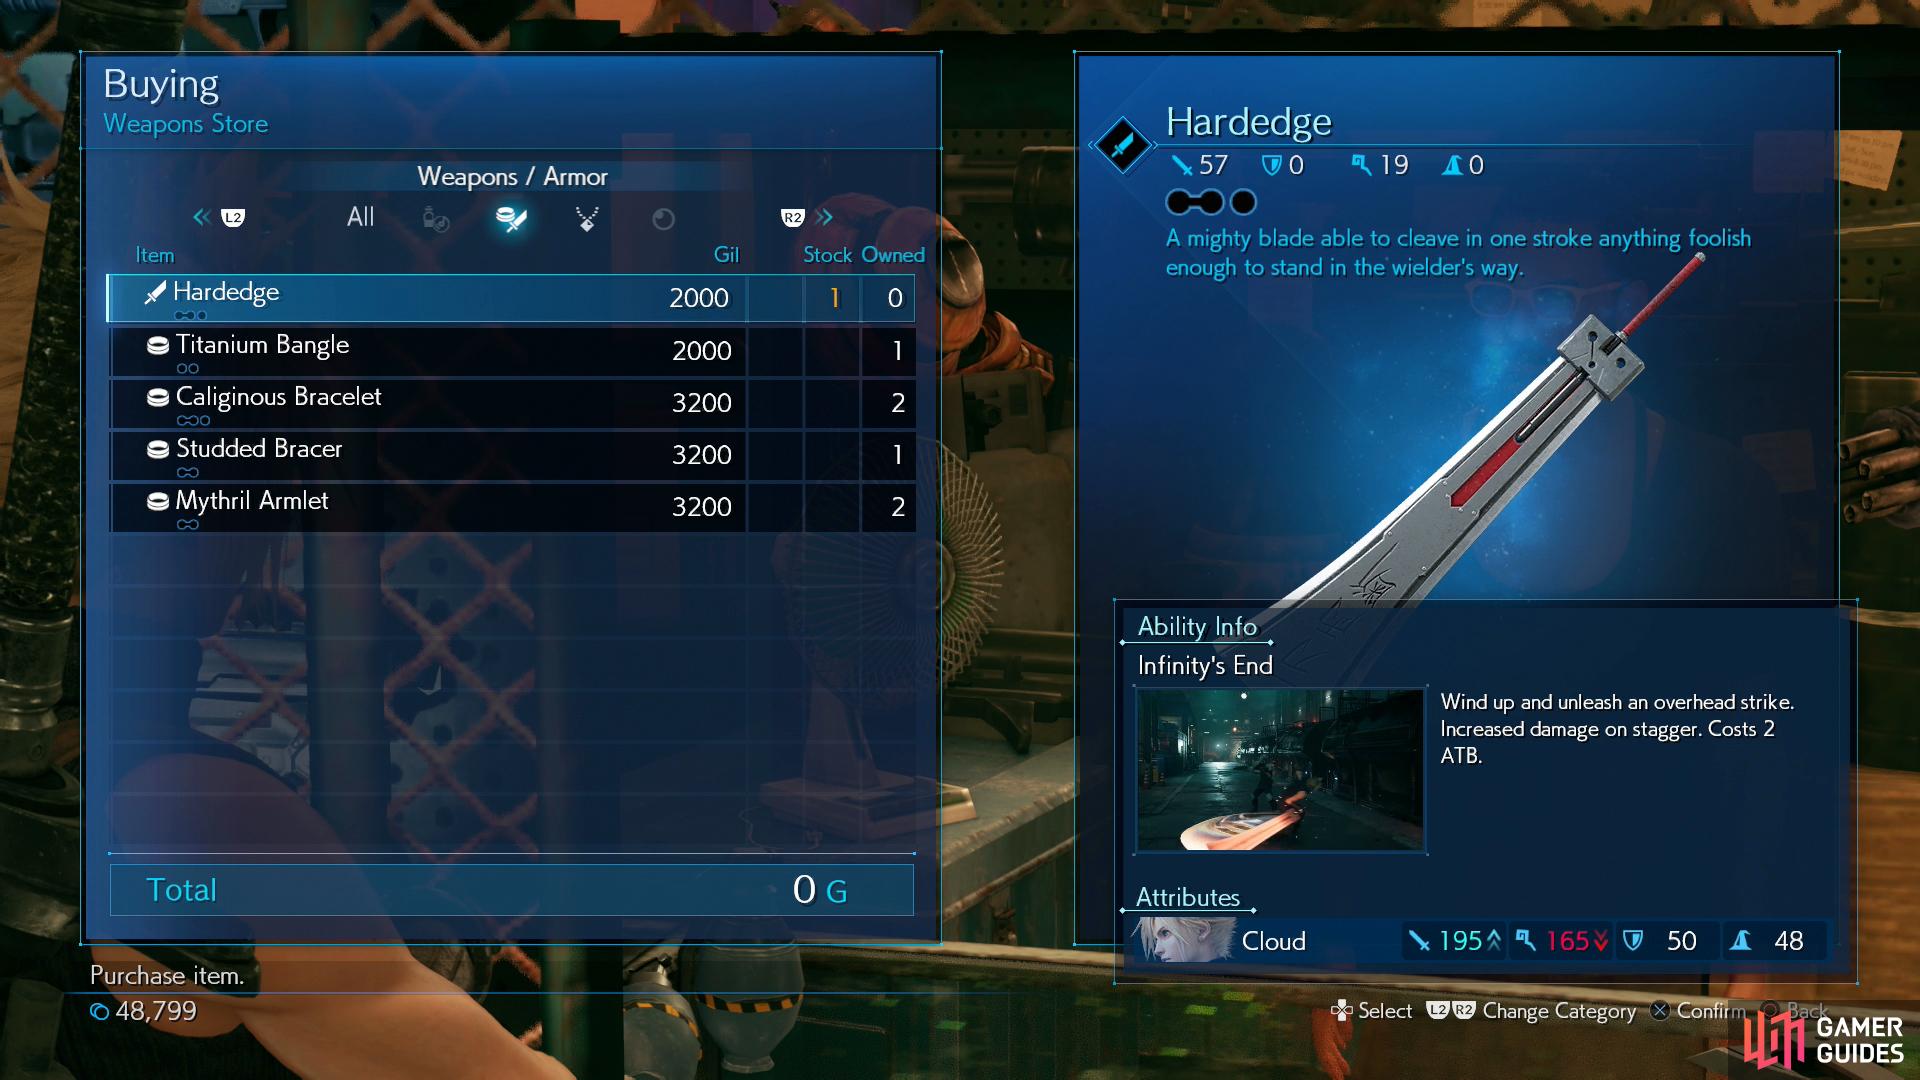 Buy the Hardedge from the weapon shop.